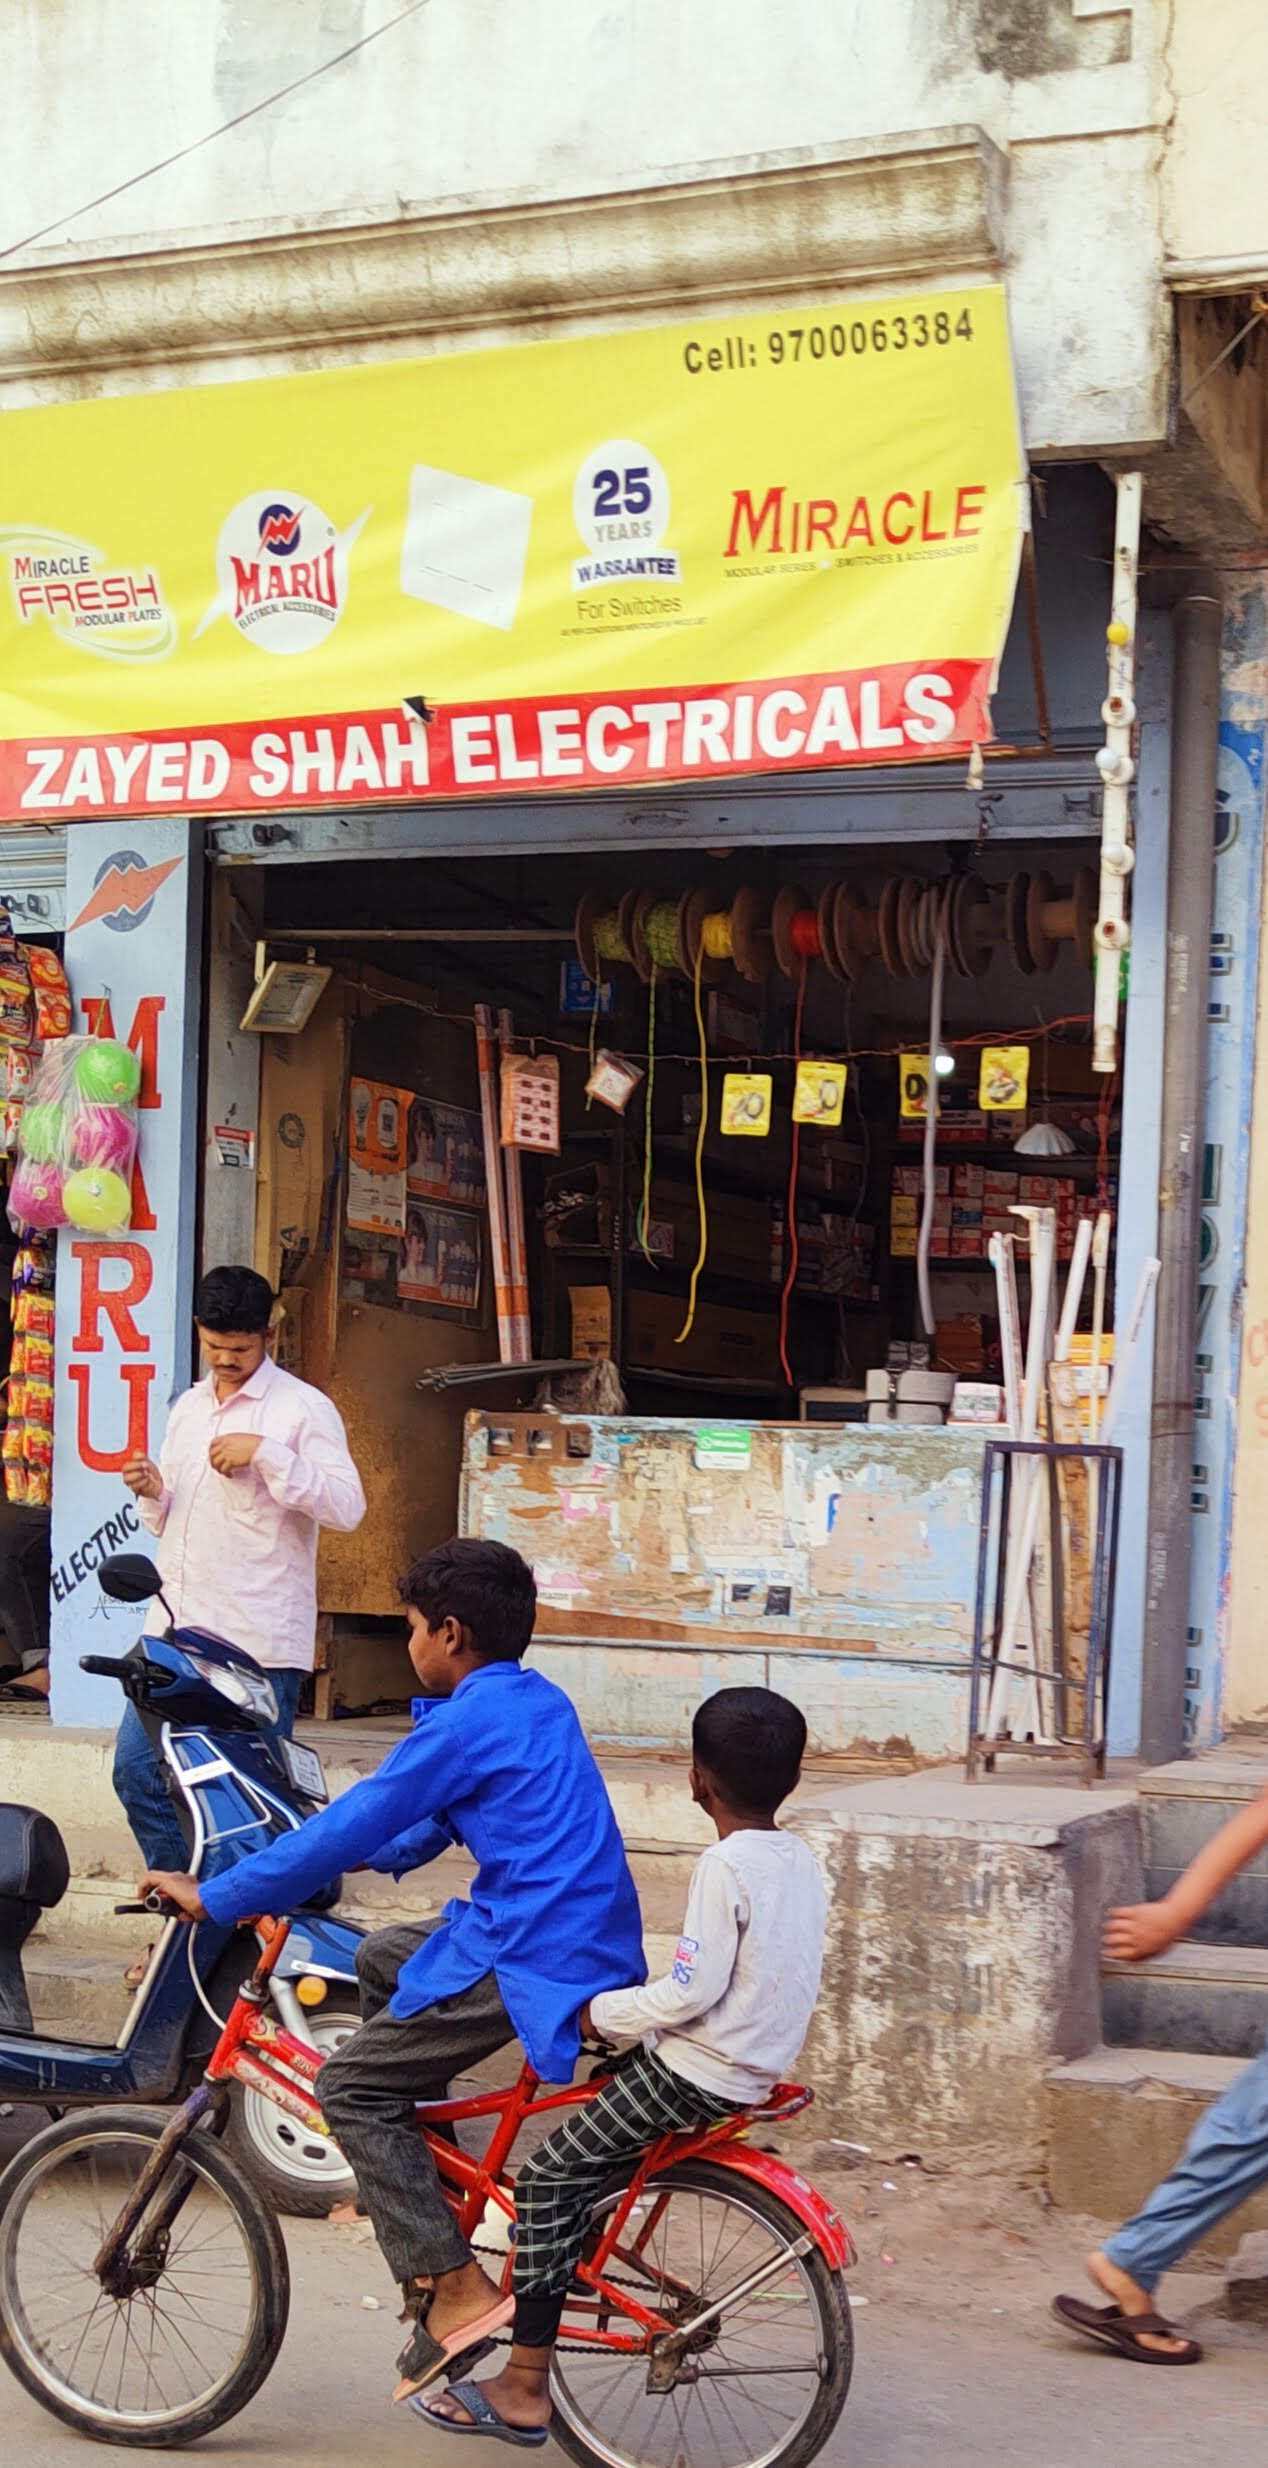 Zayed Shah Electricals in G M Chowni